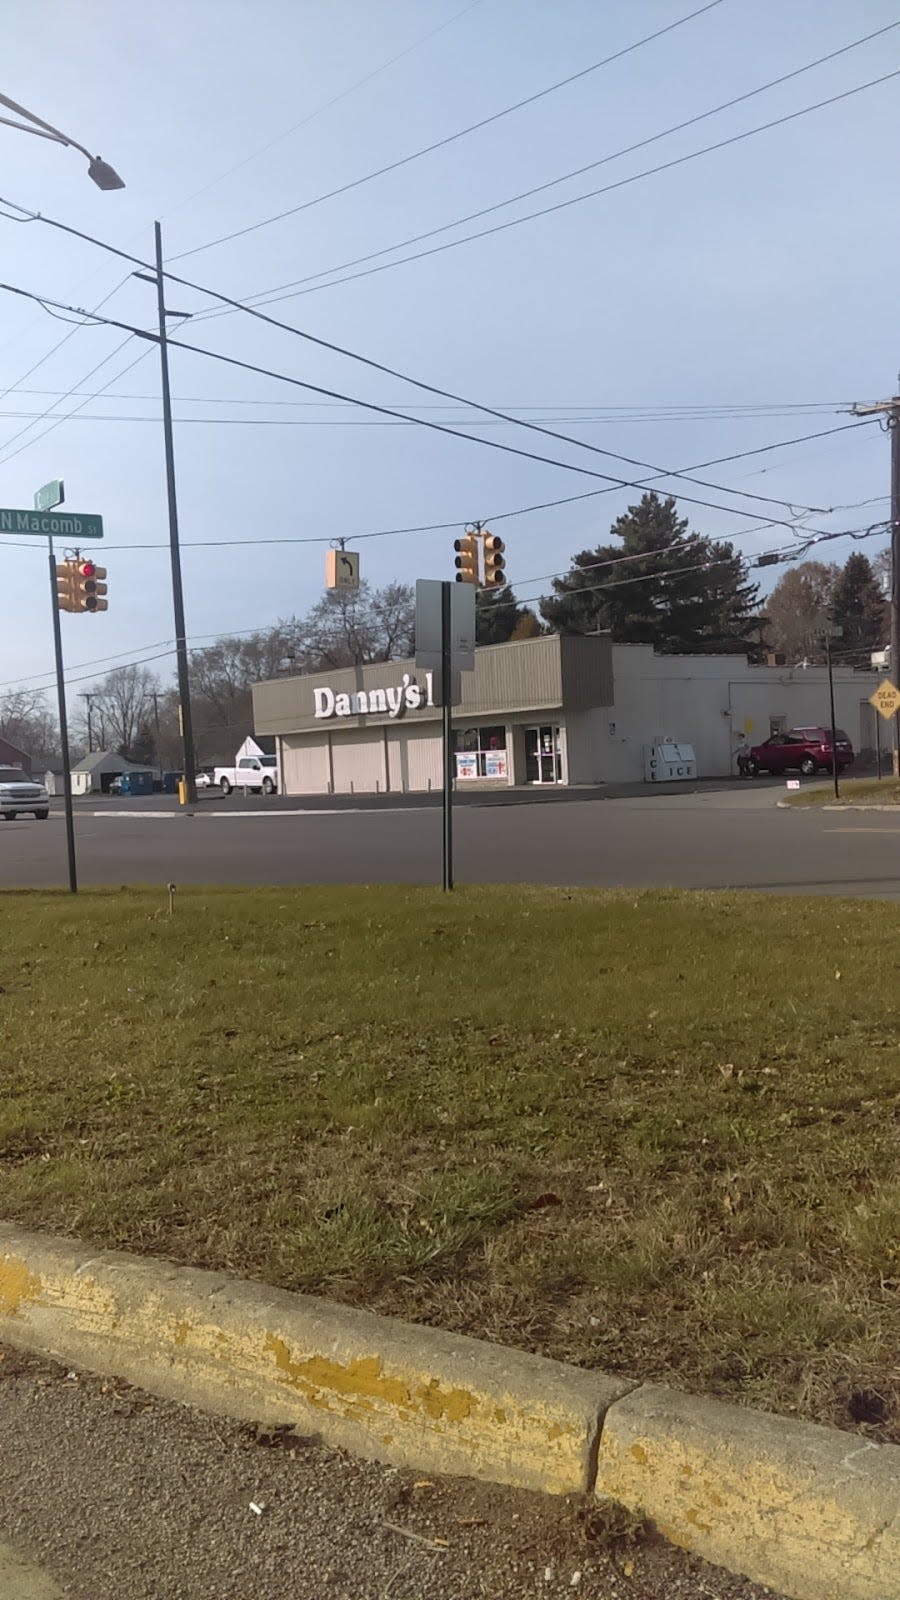 This is a photo of Danny’s II at 199 Cole Road in Monroe. Charles Micka started Micka’s Meats at the location in 1937, and son Tom Micka sold the building (built in the 1950s) to Danny Vuich Sr. in 1983.